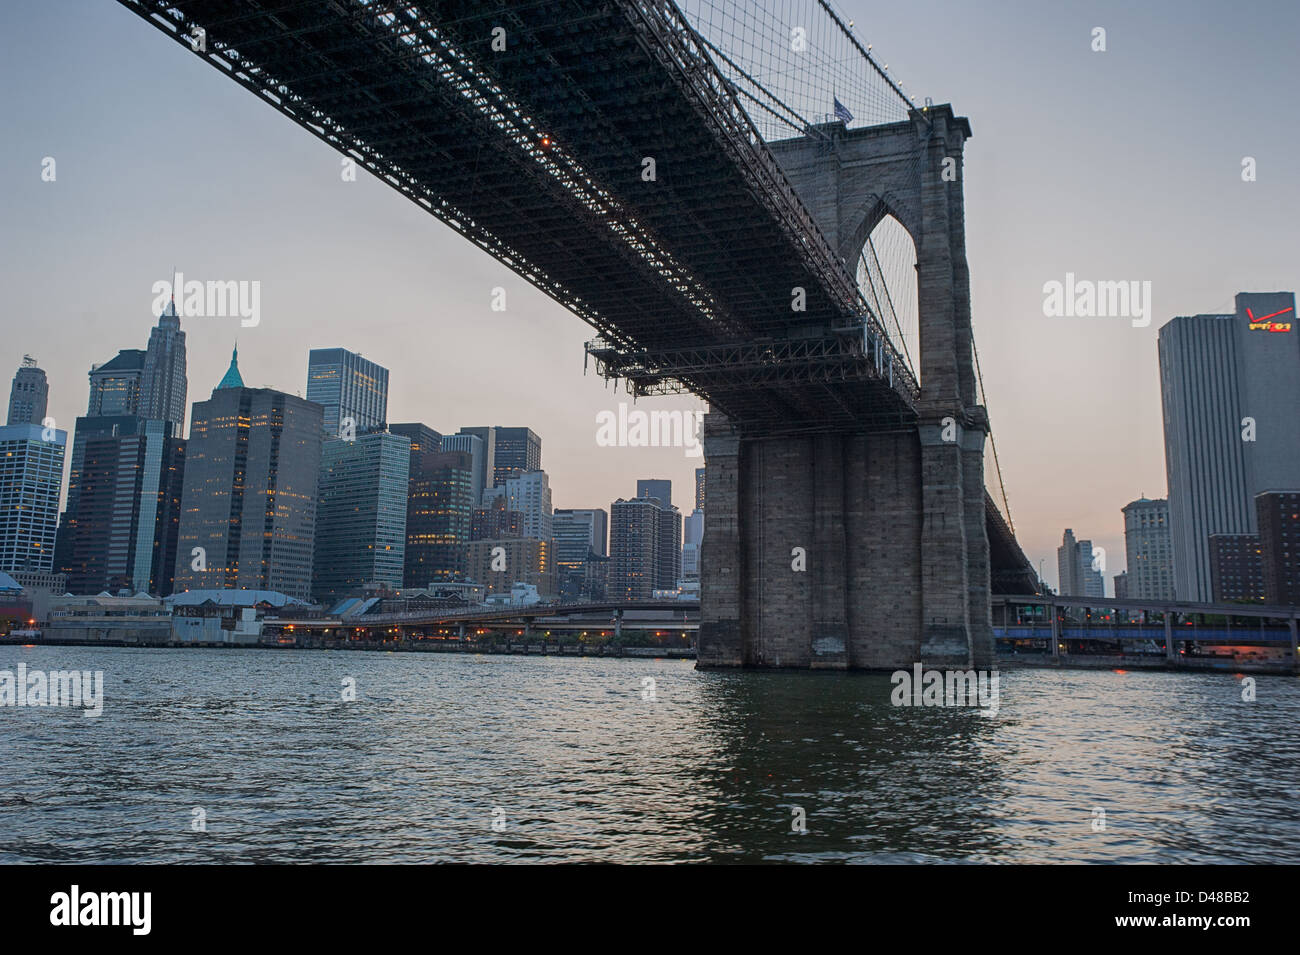 The Brooklyn Bridge near sunset on a hot summer's evening in NYC. Stock Photo